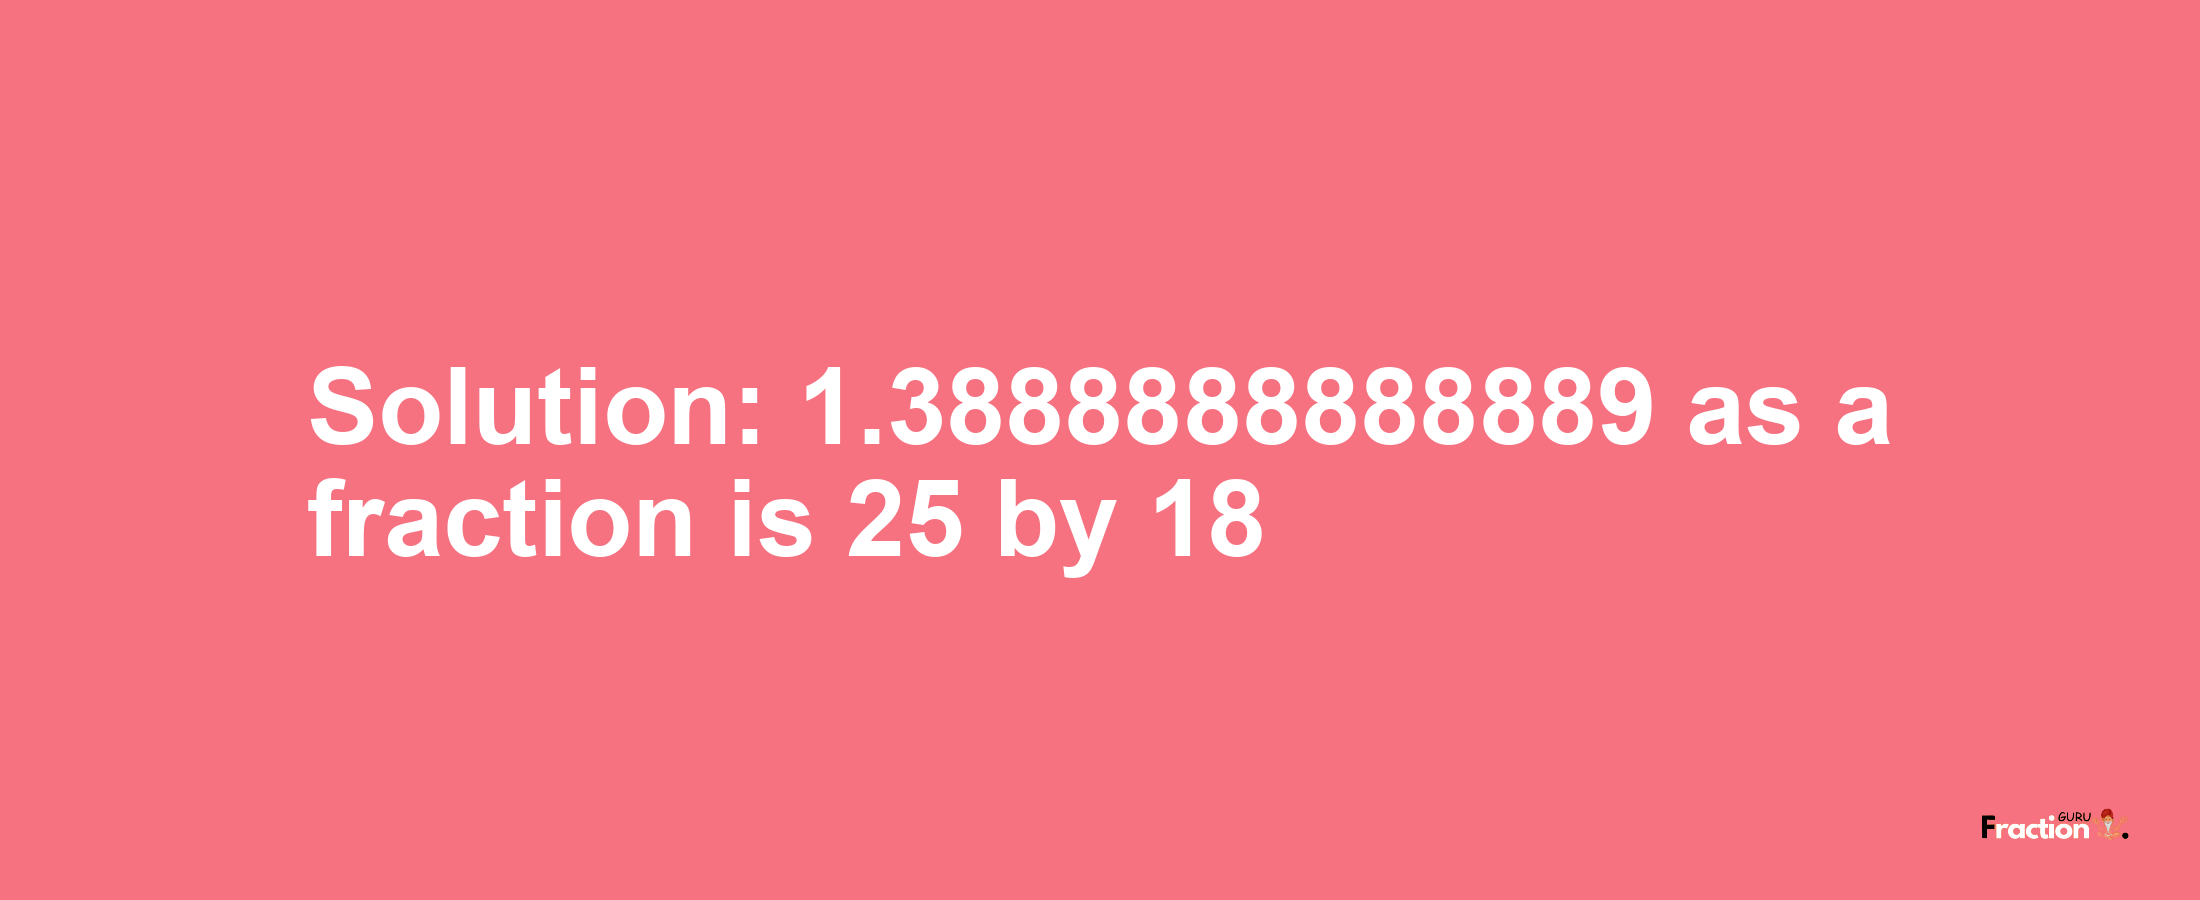 Solution:1.3888888888889 as a fraction is 25/18